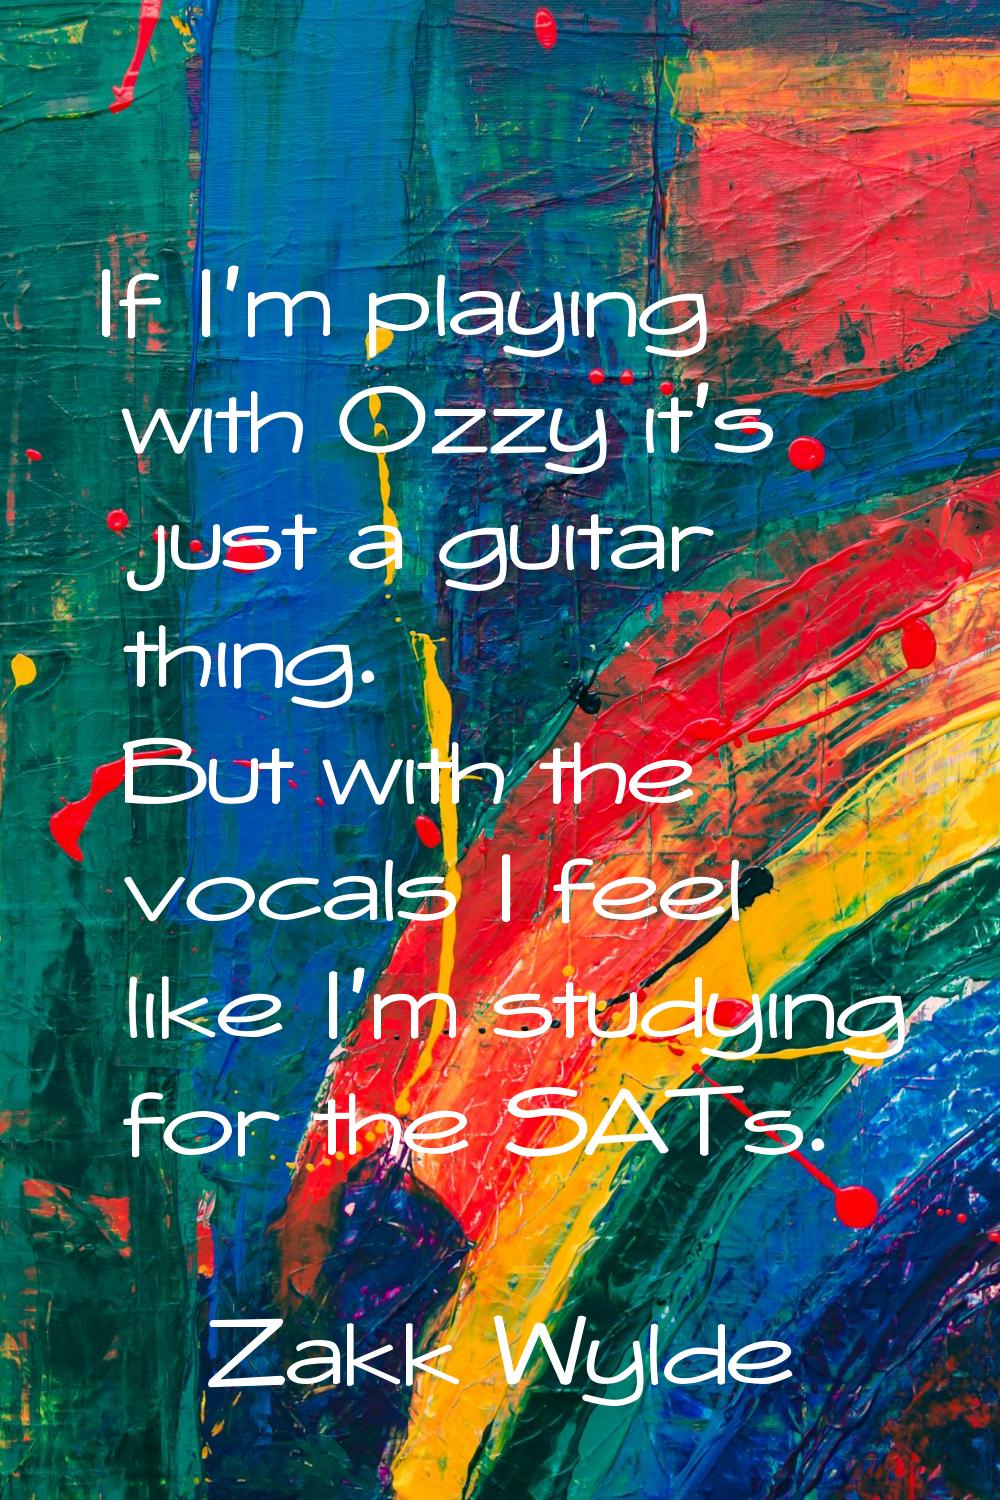 If I'm playing with Ozzy it's just a guitar thing. But with the vocals I feel like I'm studying for